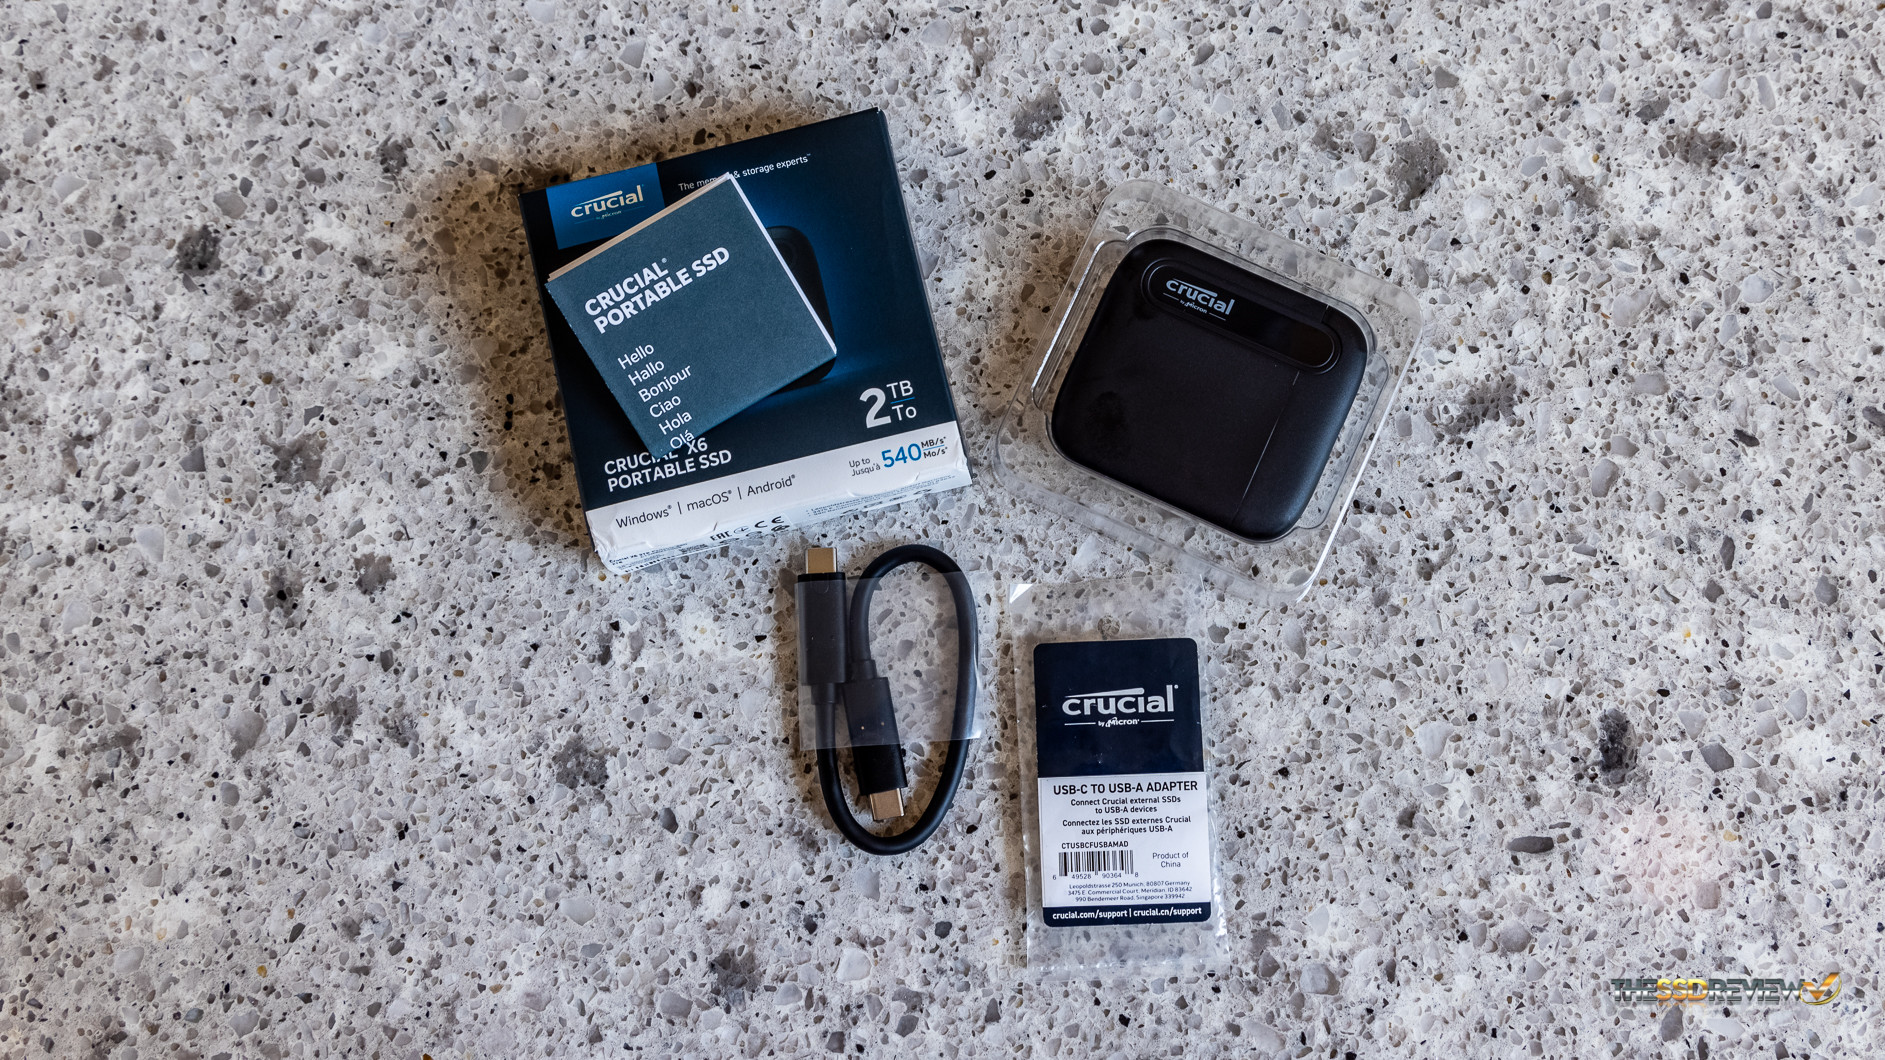 Crucial X6 1TB Portable SSD - Disassembly - What's Inside? 